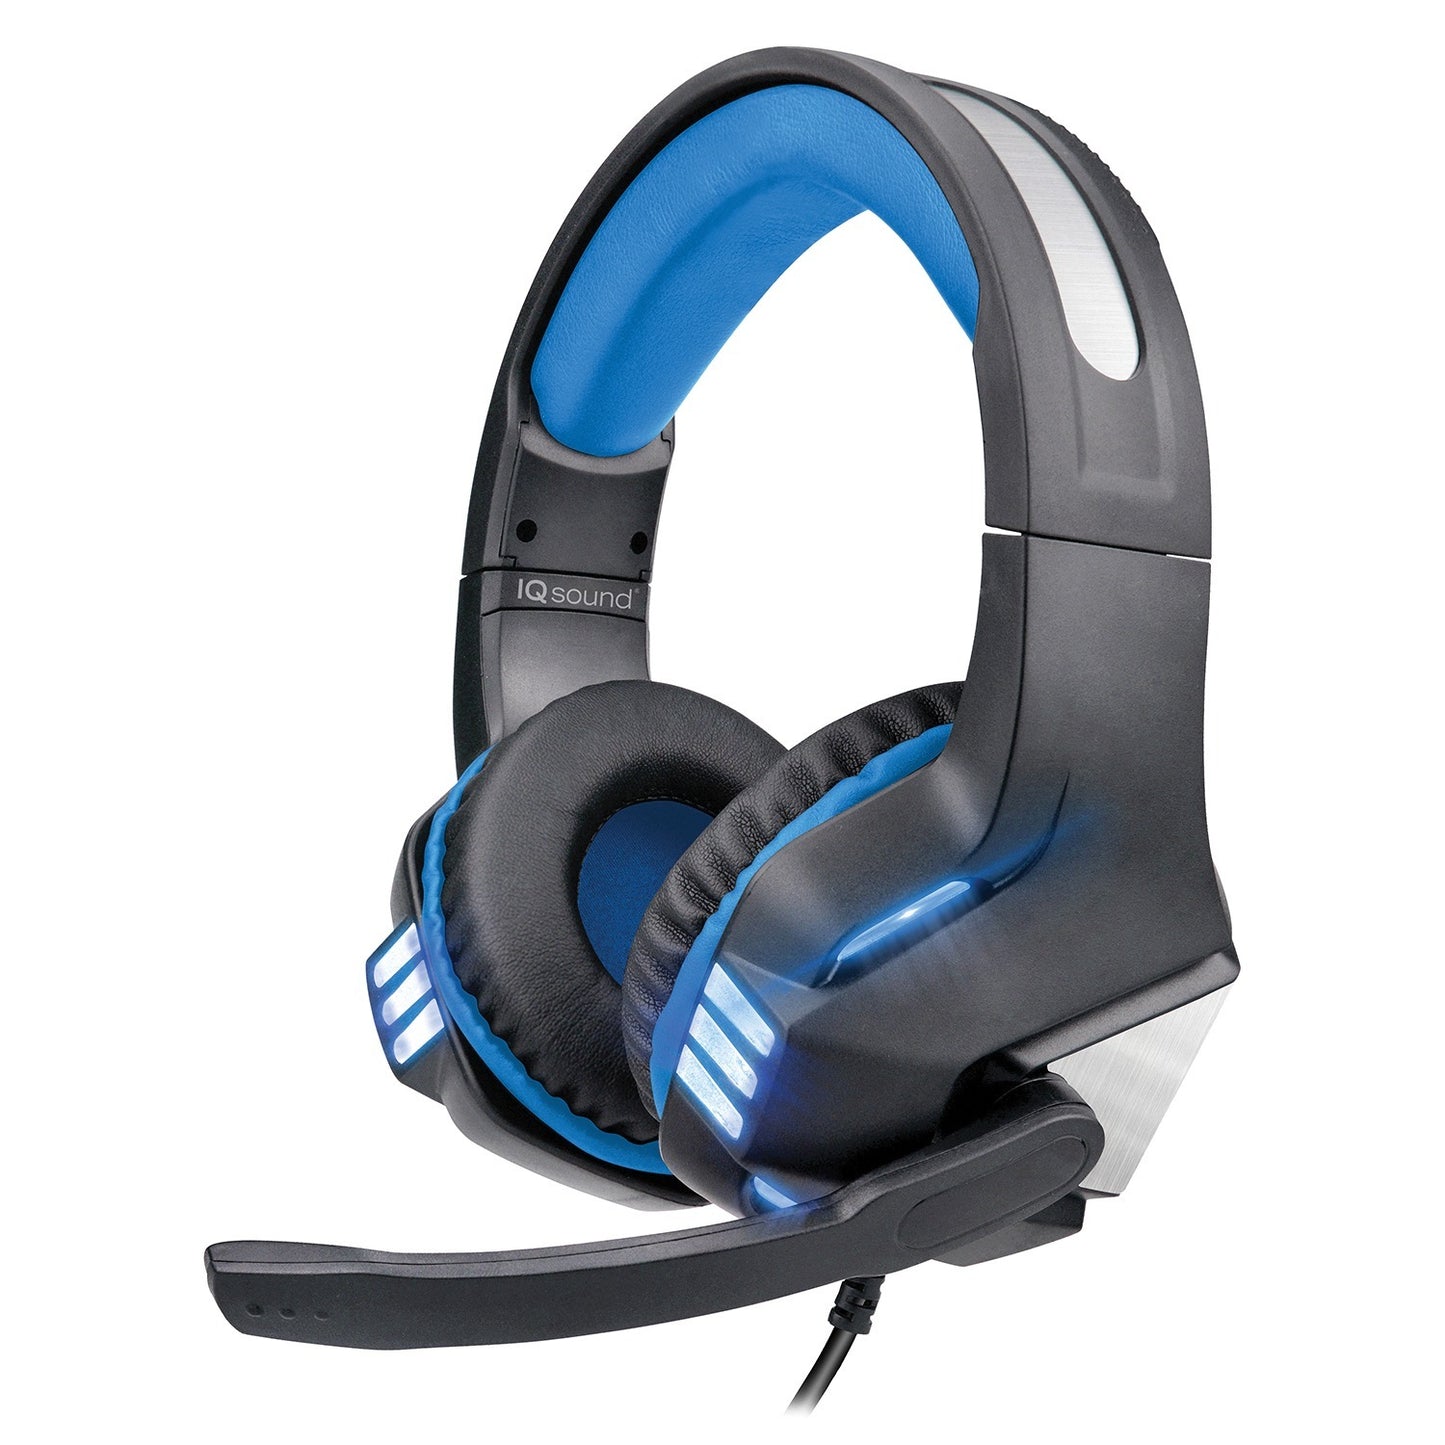 IQ Sound IQ-480G - BLUE Pro-Wired Gaming Headset with Lights (Blue)